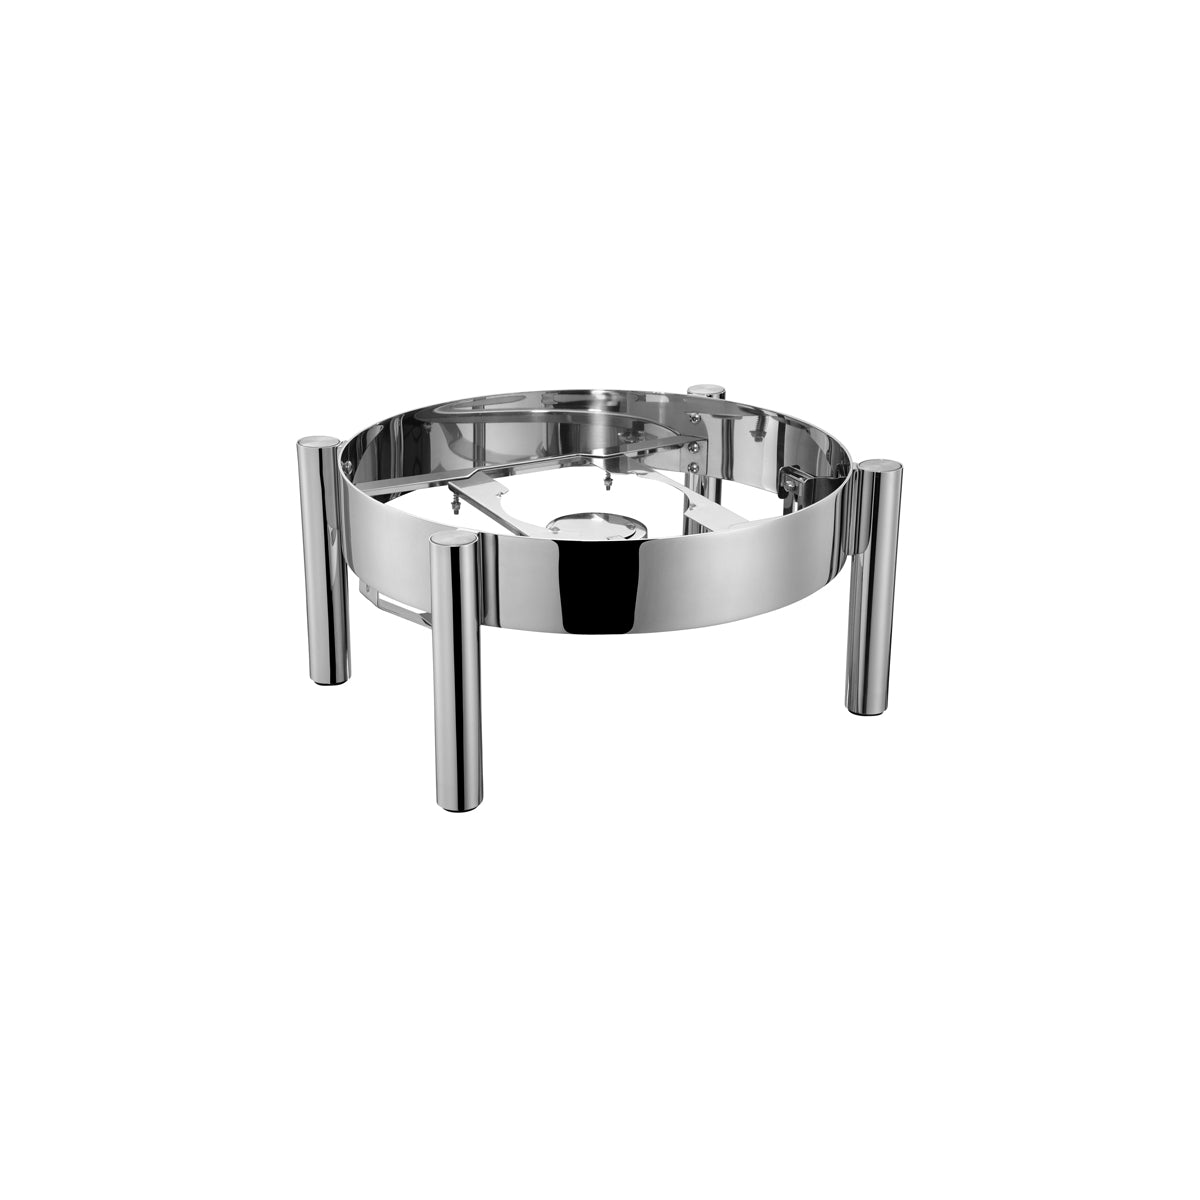 54909-S Chef Inox Soup Chafer Stand Round Stainless Steel to Suit 54909 Tomkin Australia Hospitality Supplies